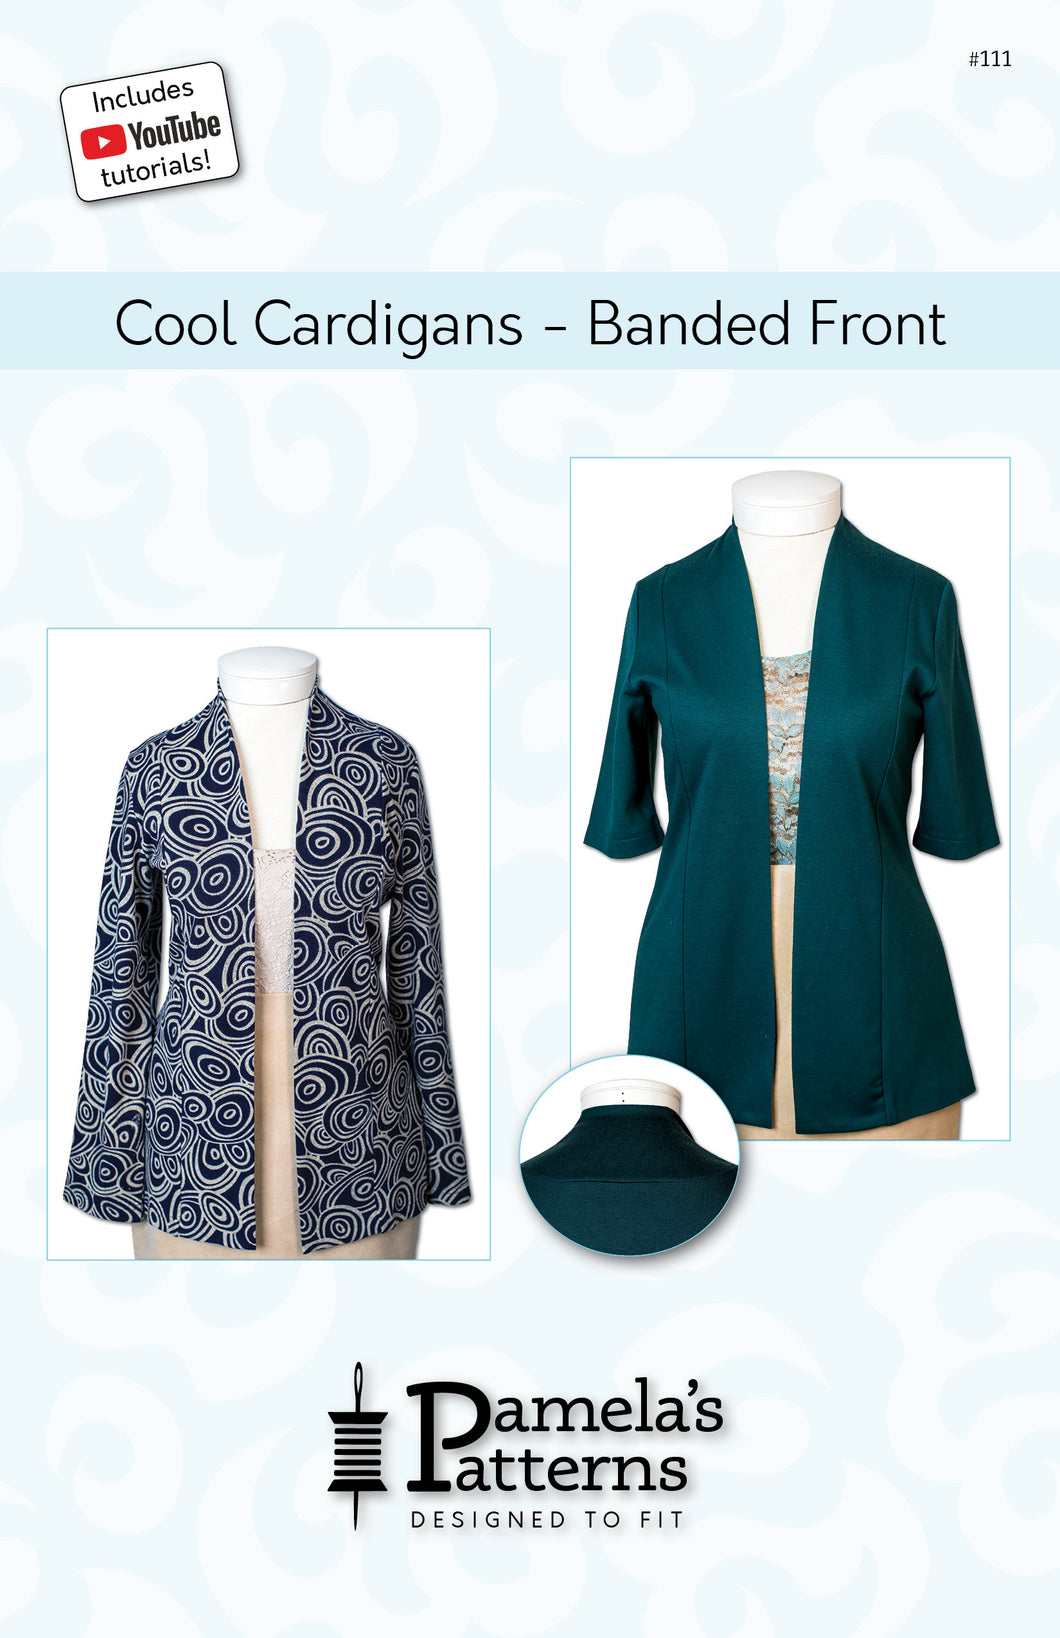 #111 Cool Cardigans - Banded Front